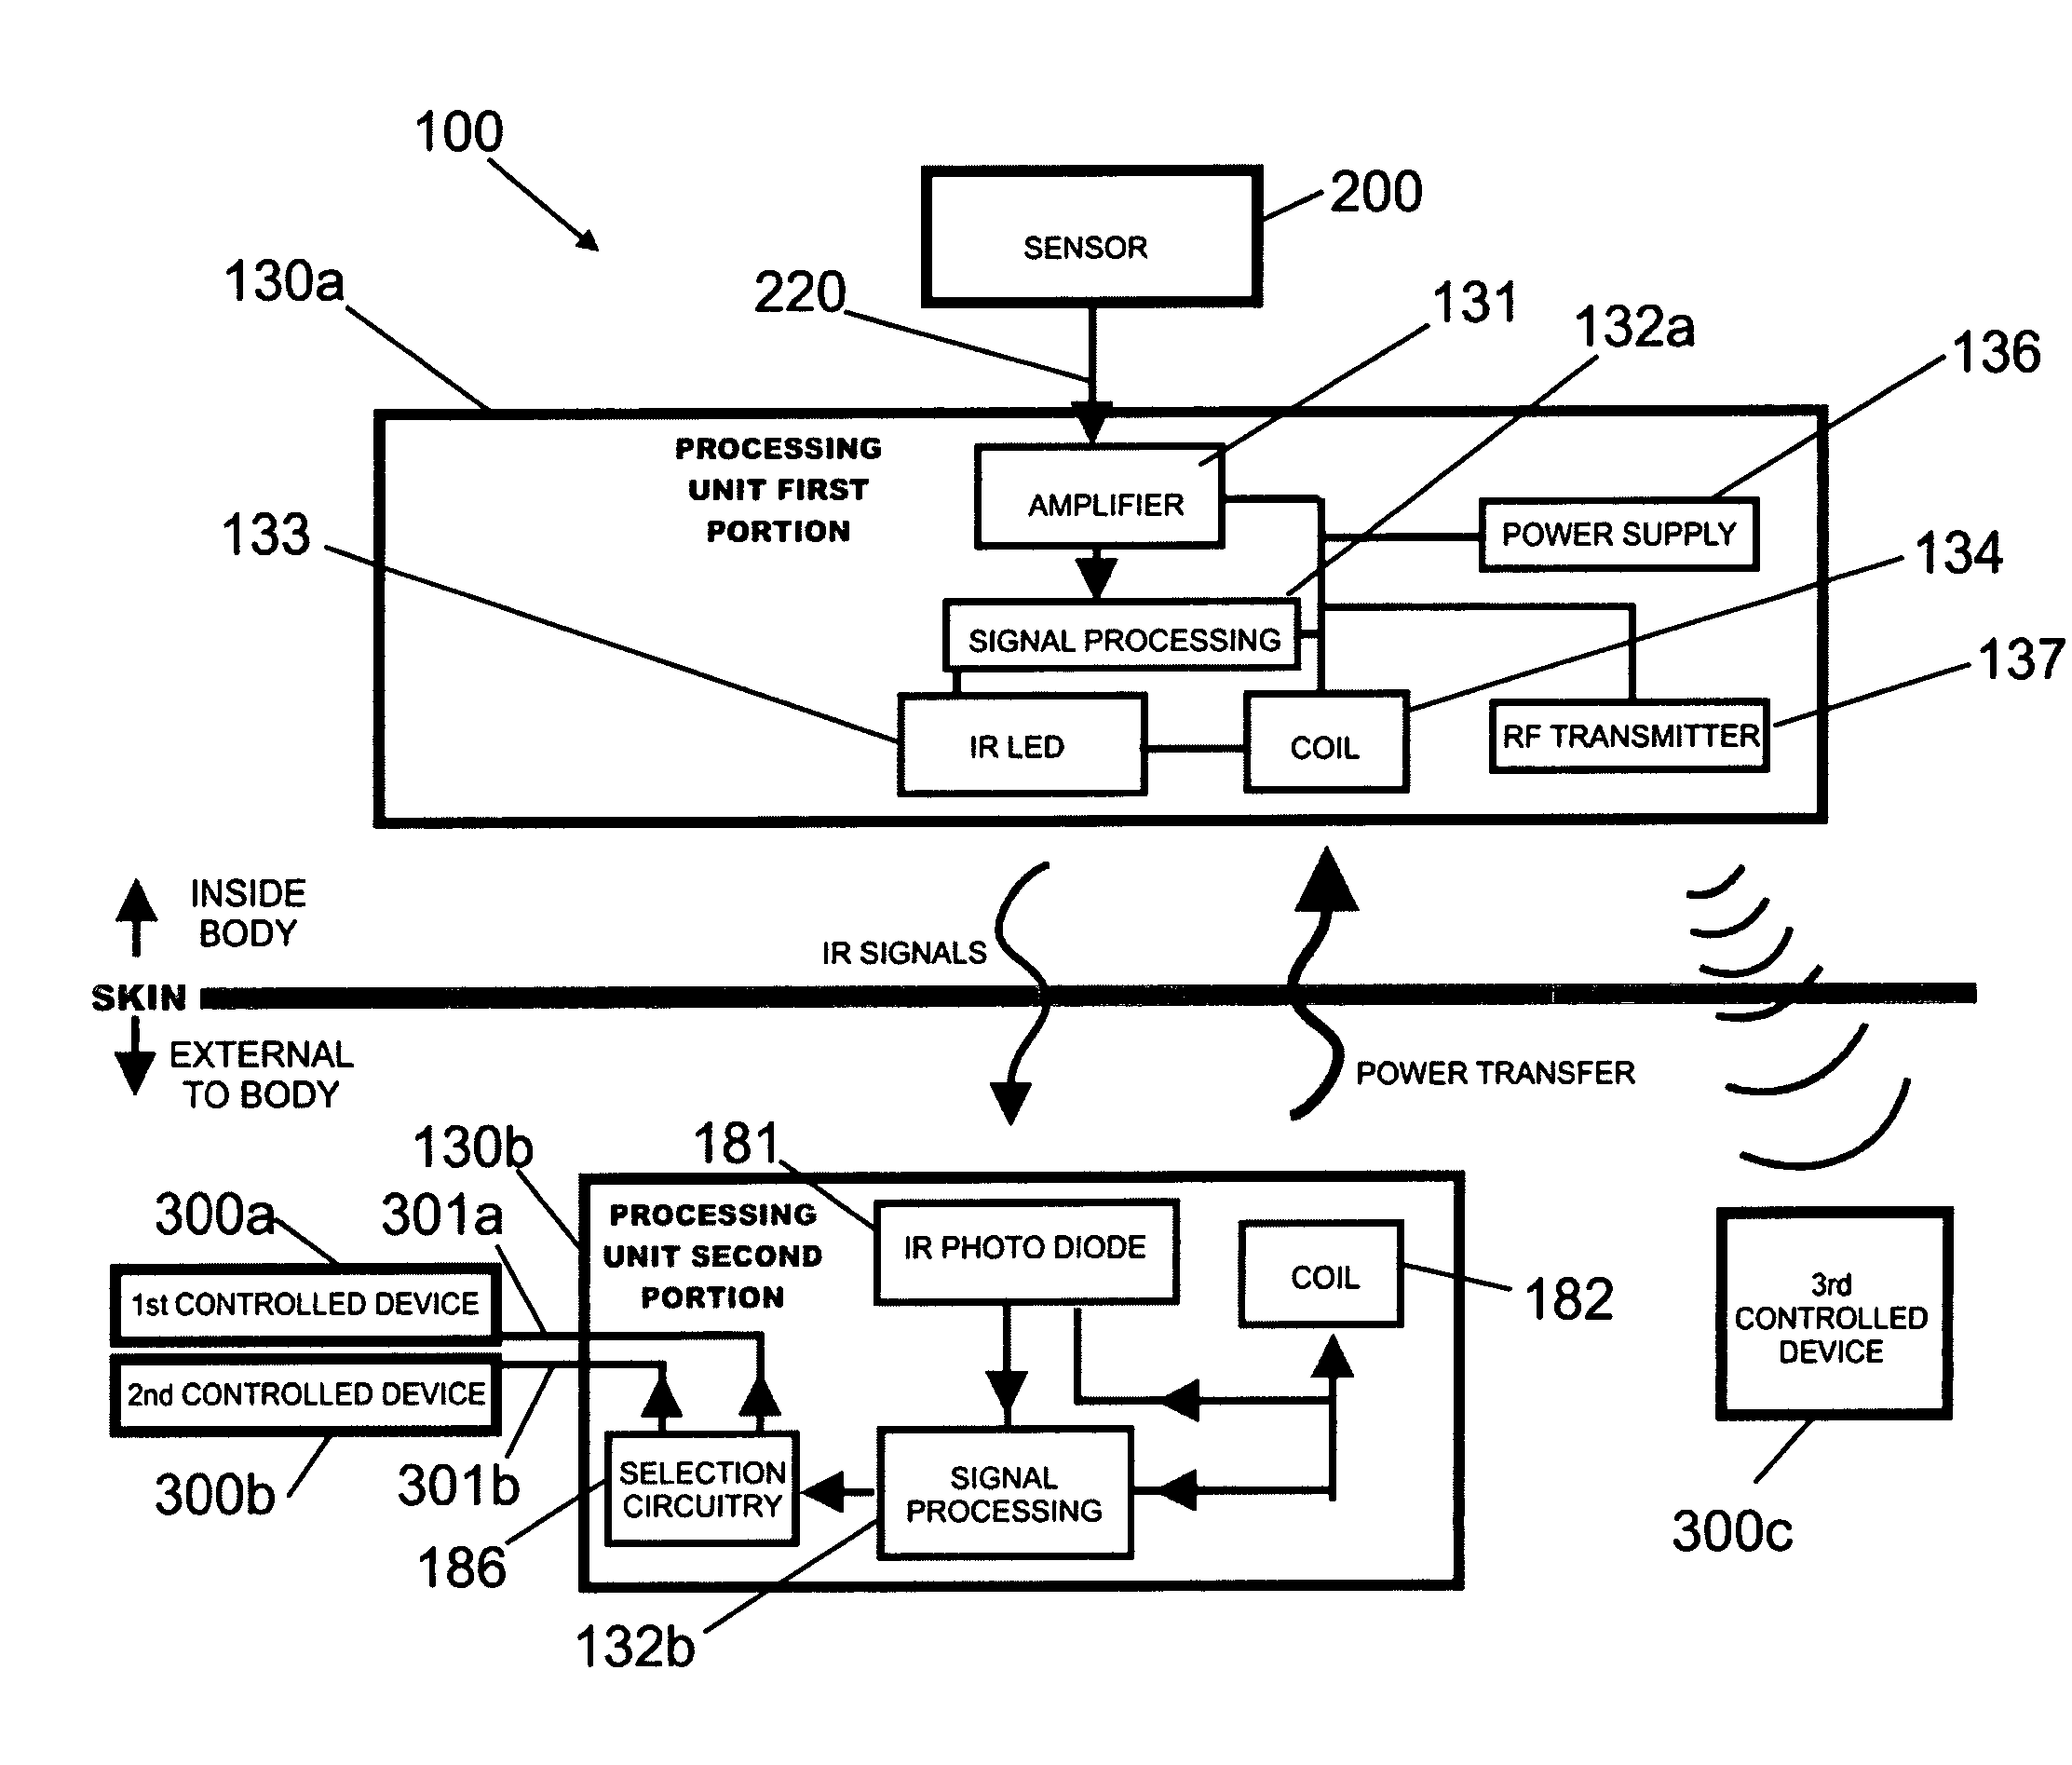 Biological interface system